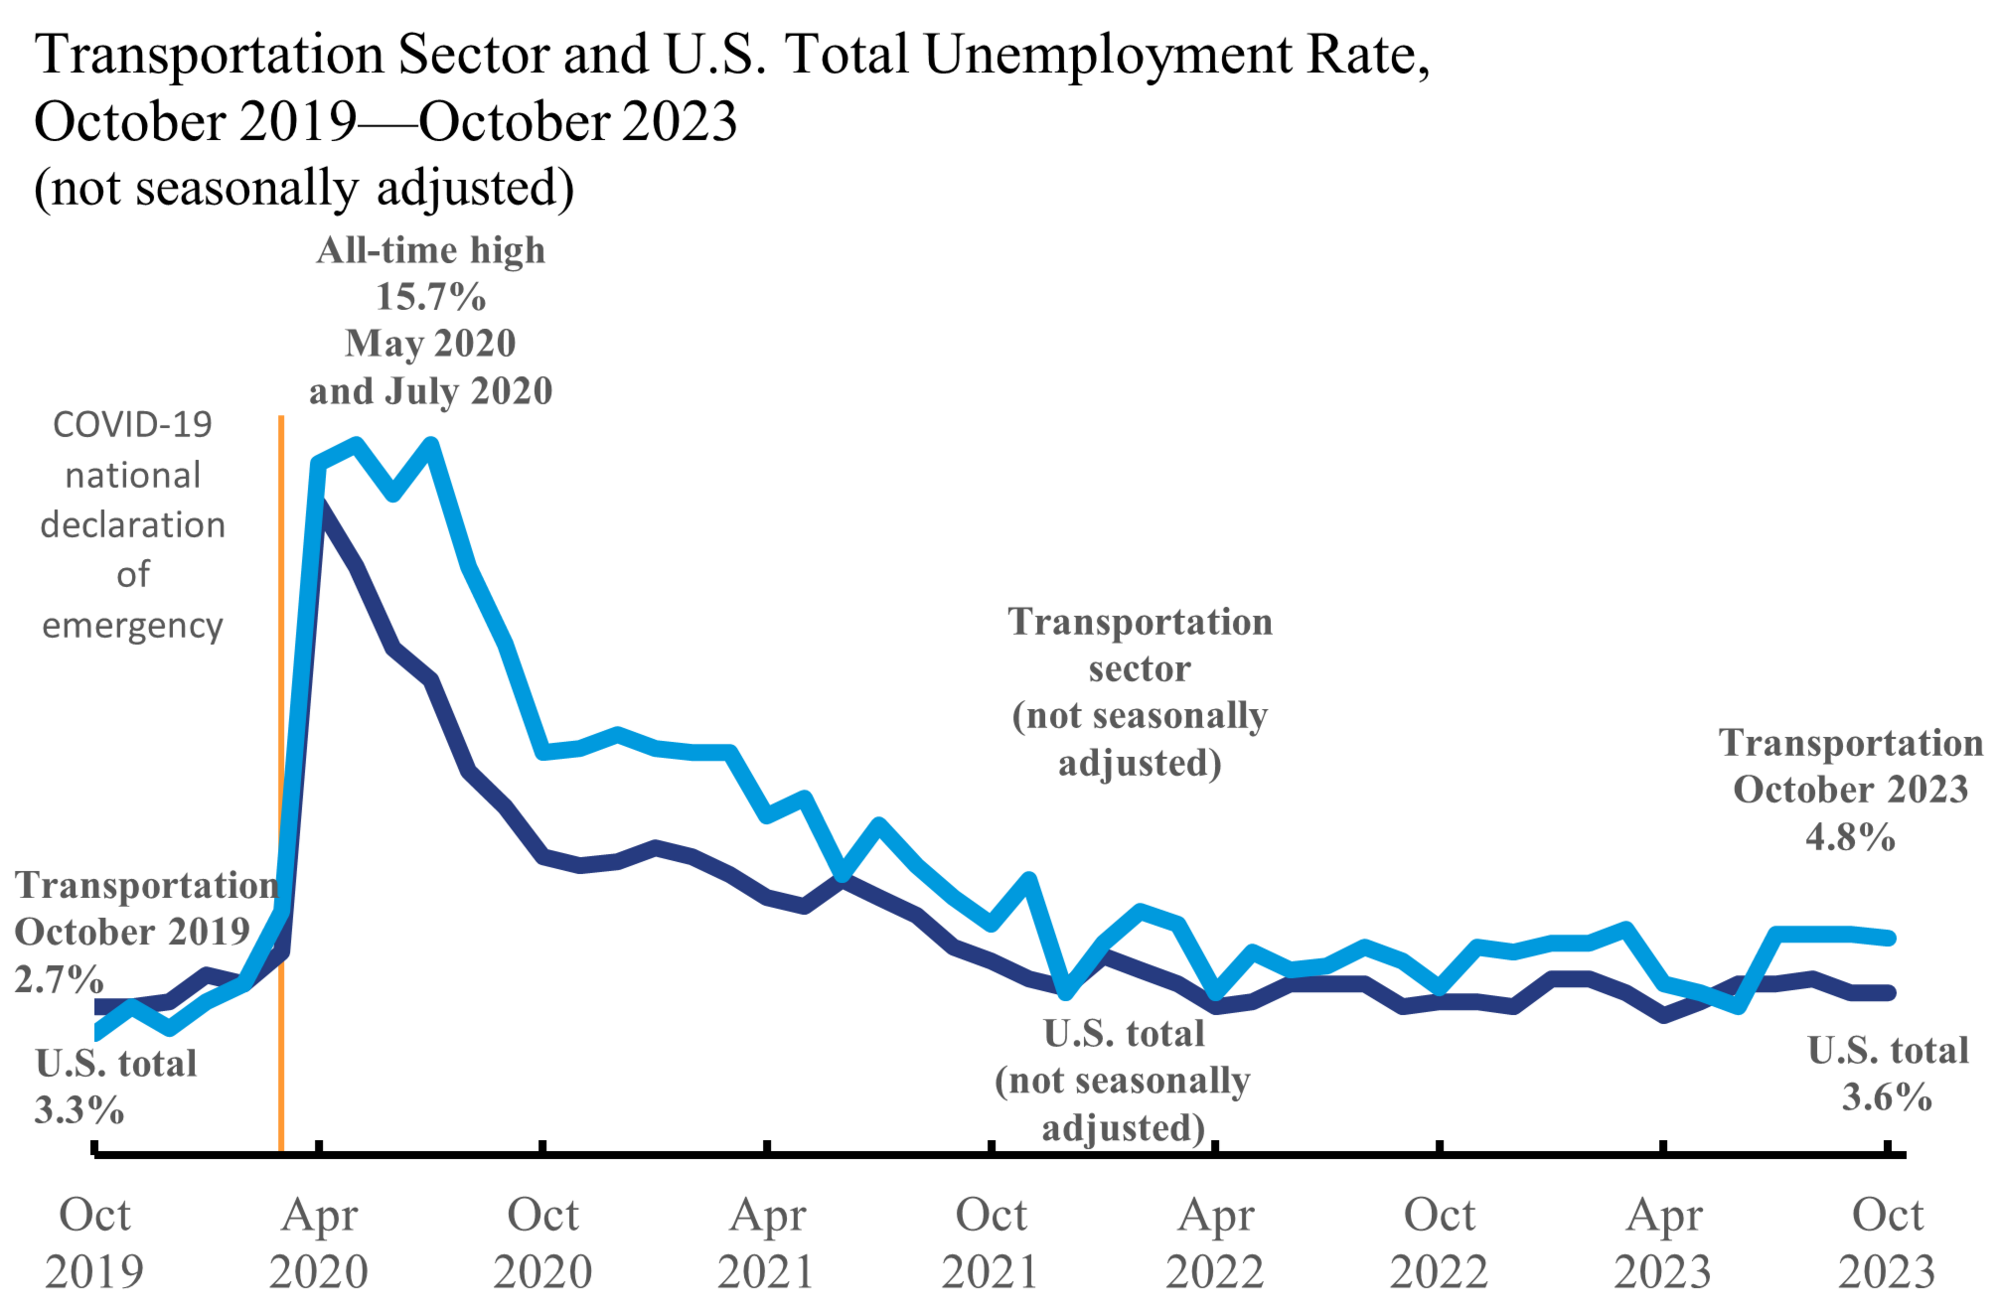 Line graph showing the transportation sector and US total unemployment rate from October 2019 to October 2023